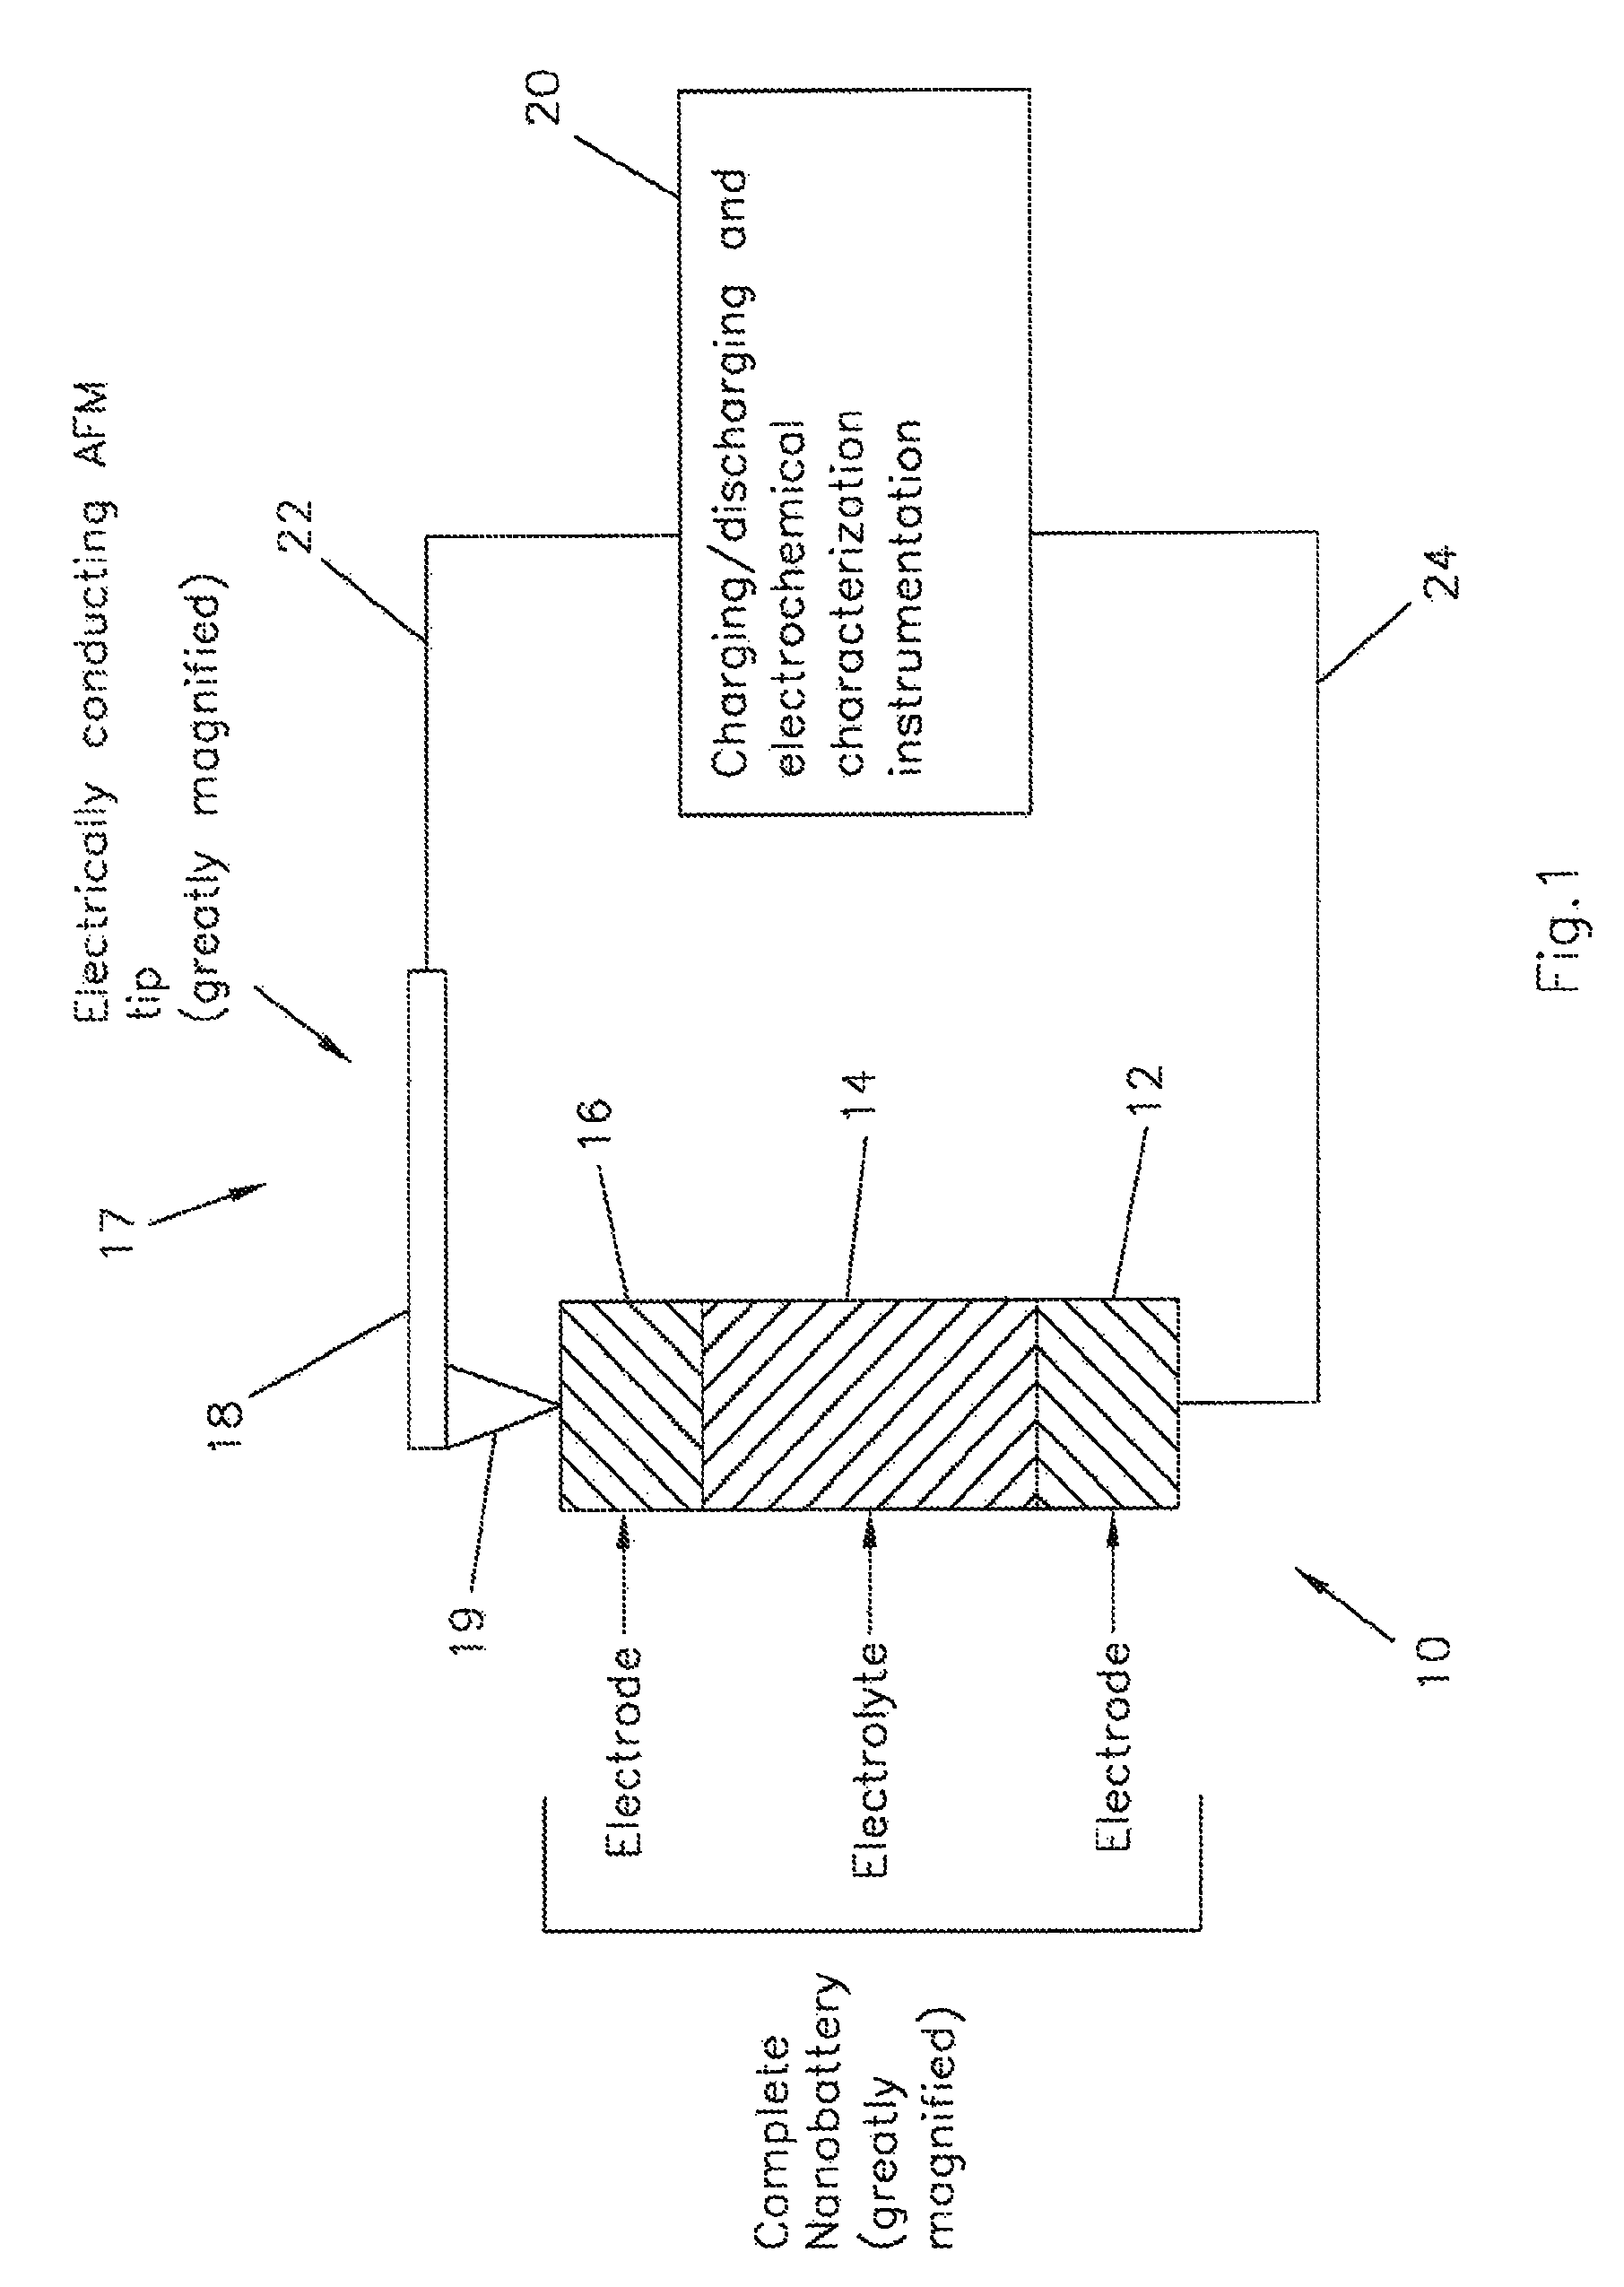 Charged arrays of micro and nanoscale electrochemical cells and batteries for computer and nanodevice memory and power supply